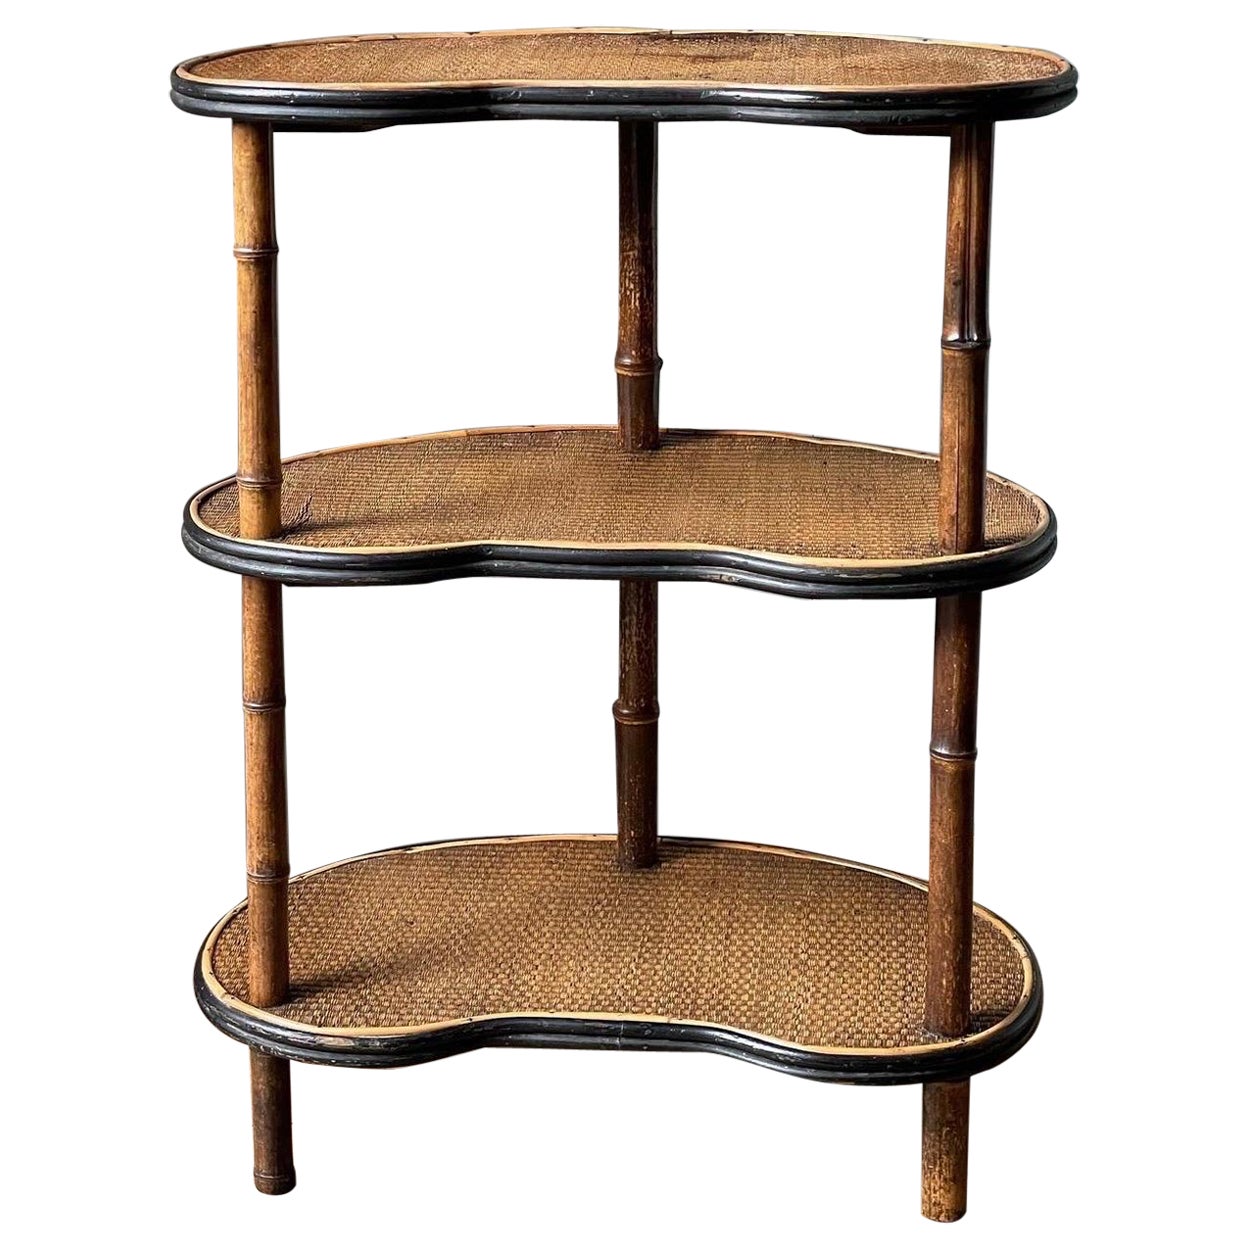 An Unusual Kidney Shaped Three Tier Bamboo Etagere